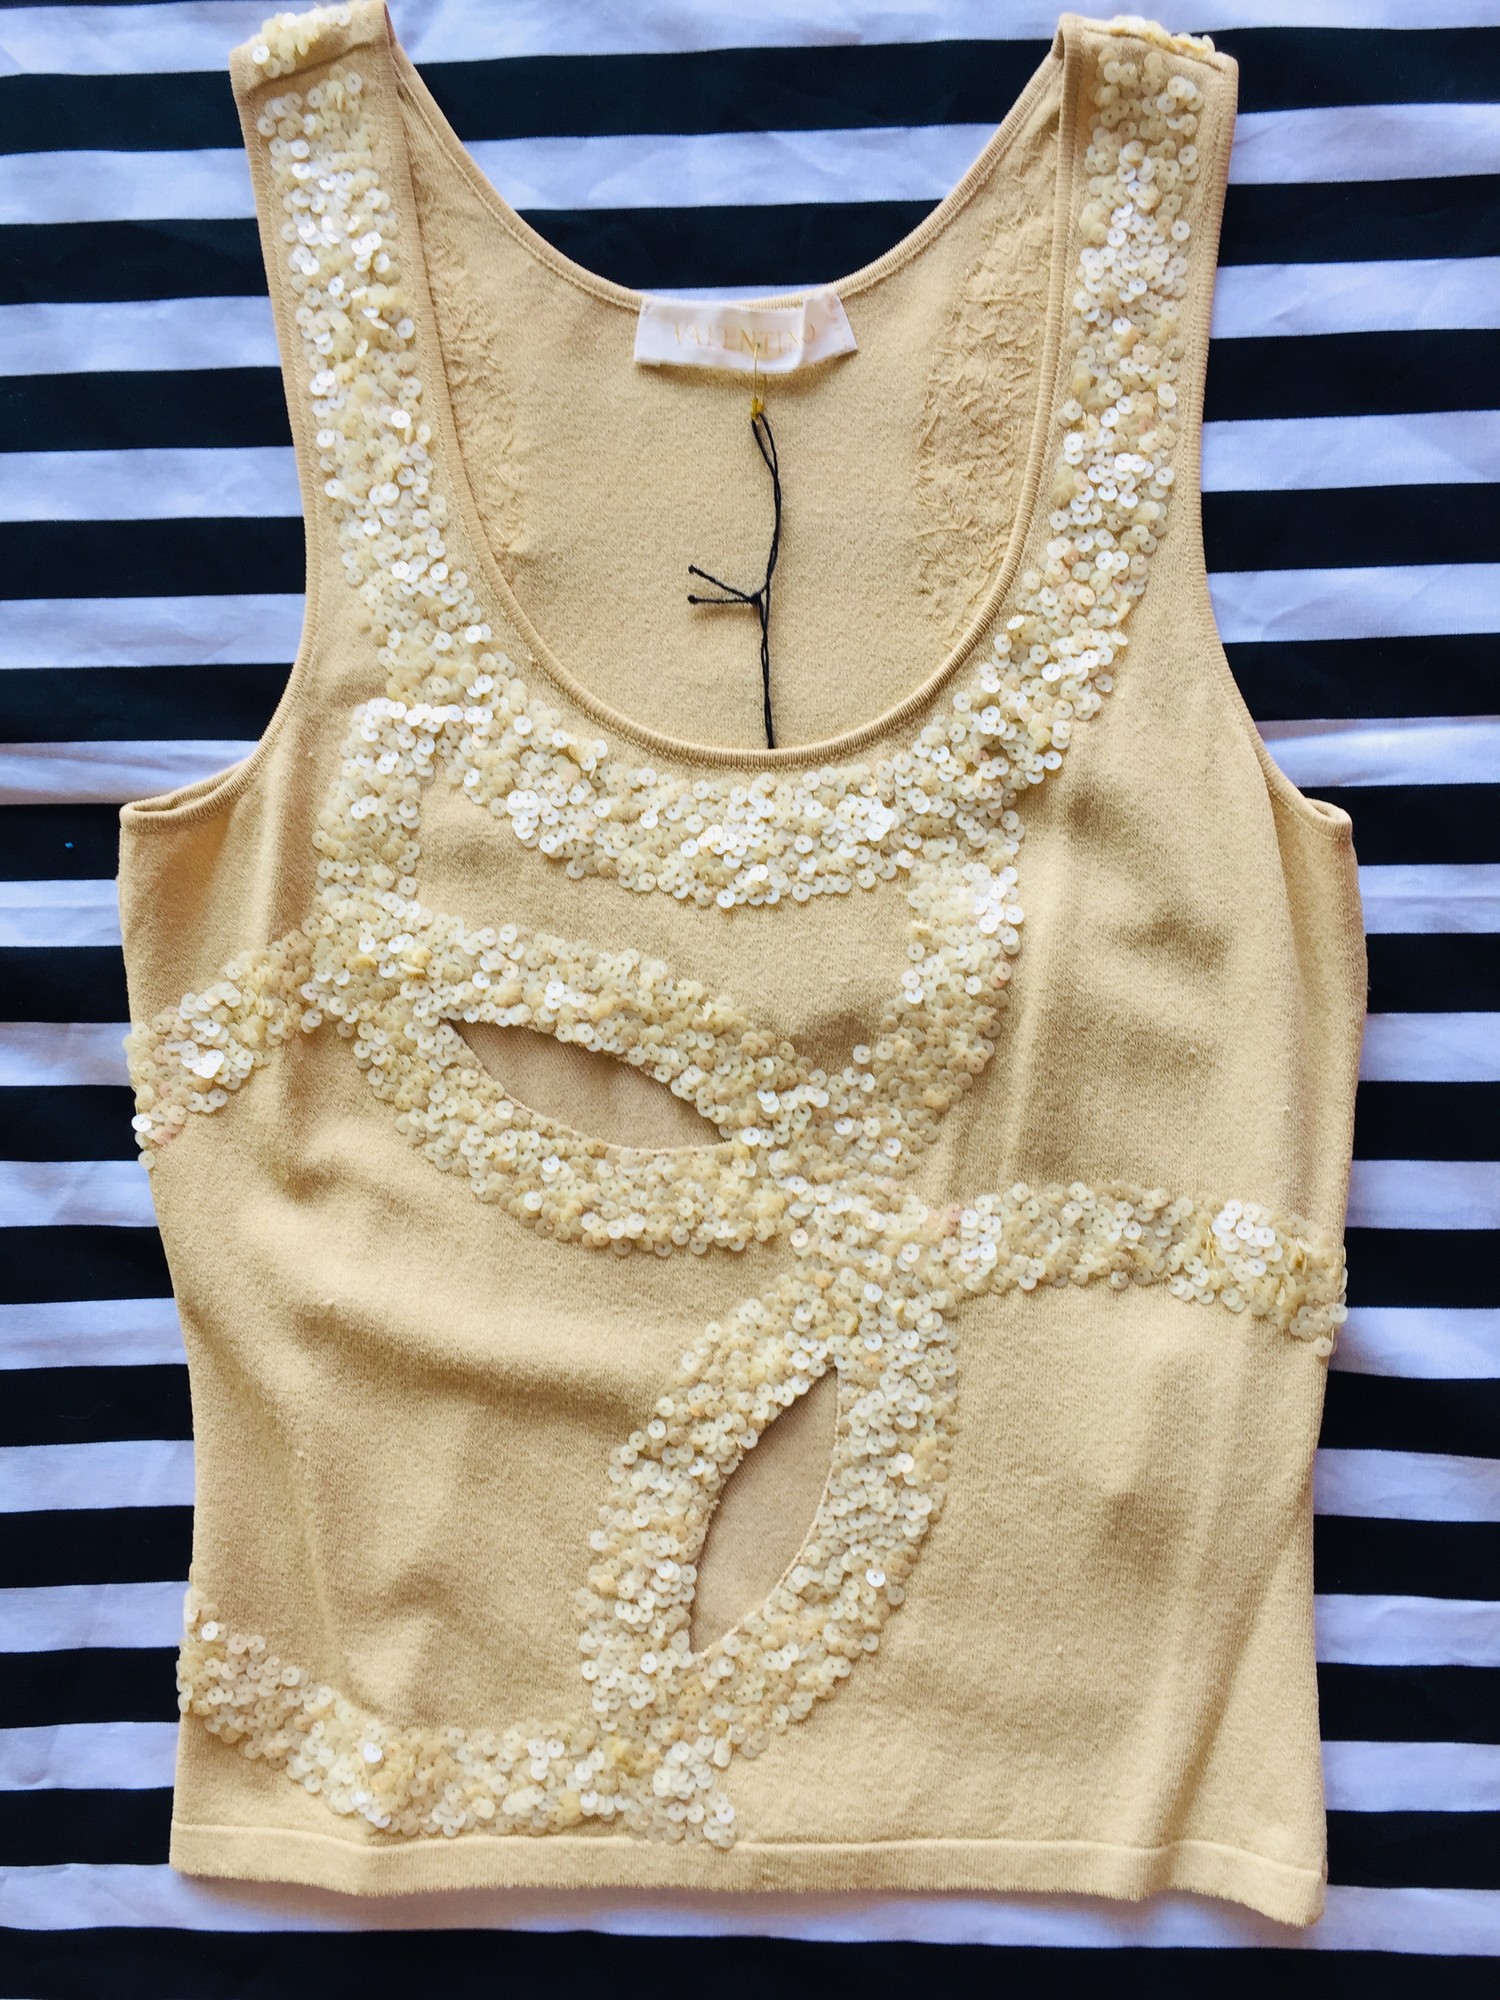 Valentino sleeveless tank with cutouts. This item has a very unique and fun design with detailed sequin work. Size small; Tan